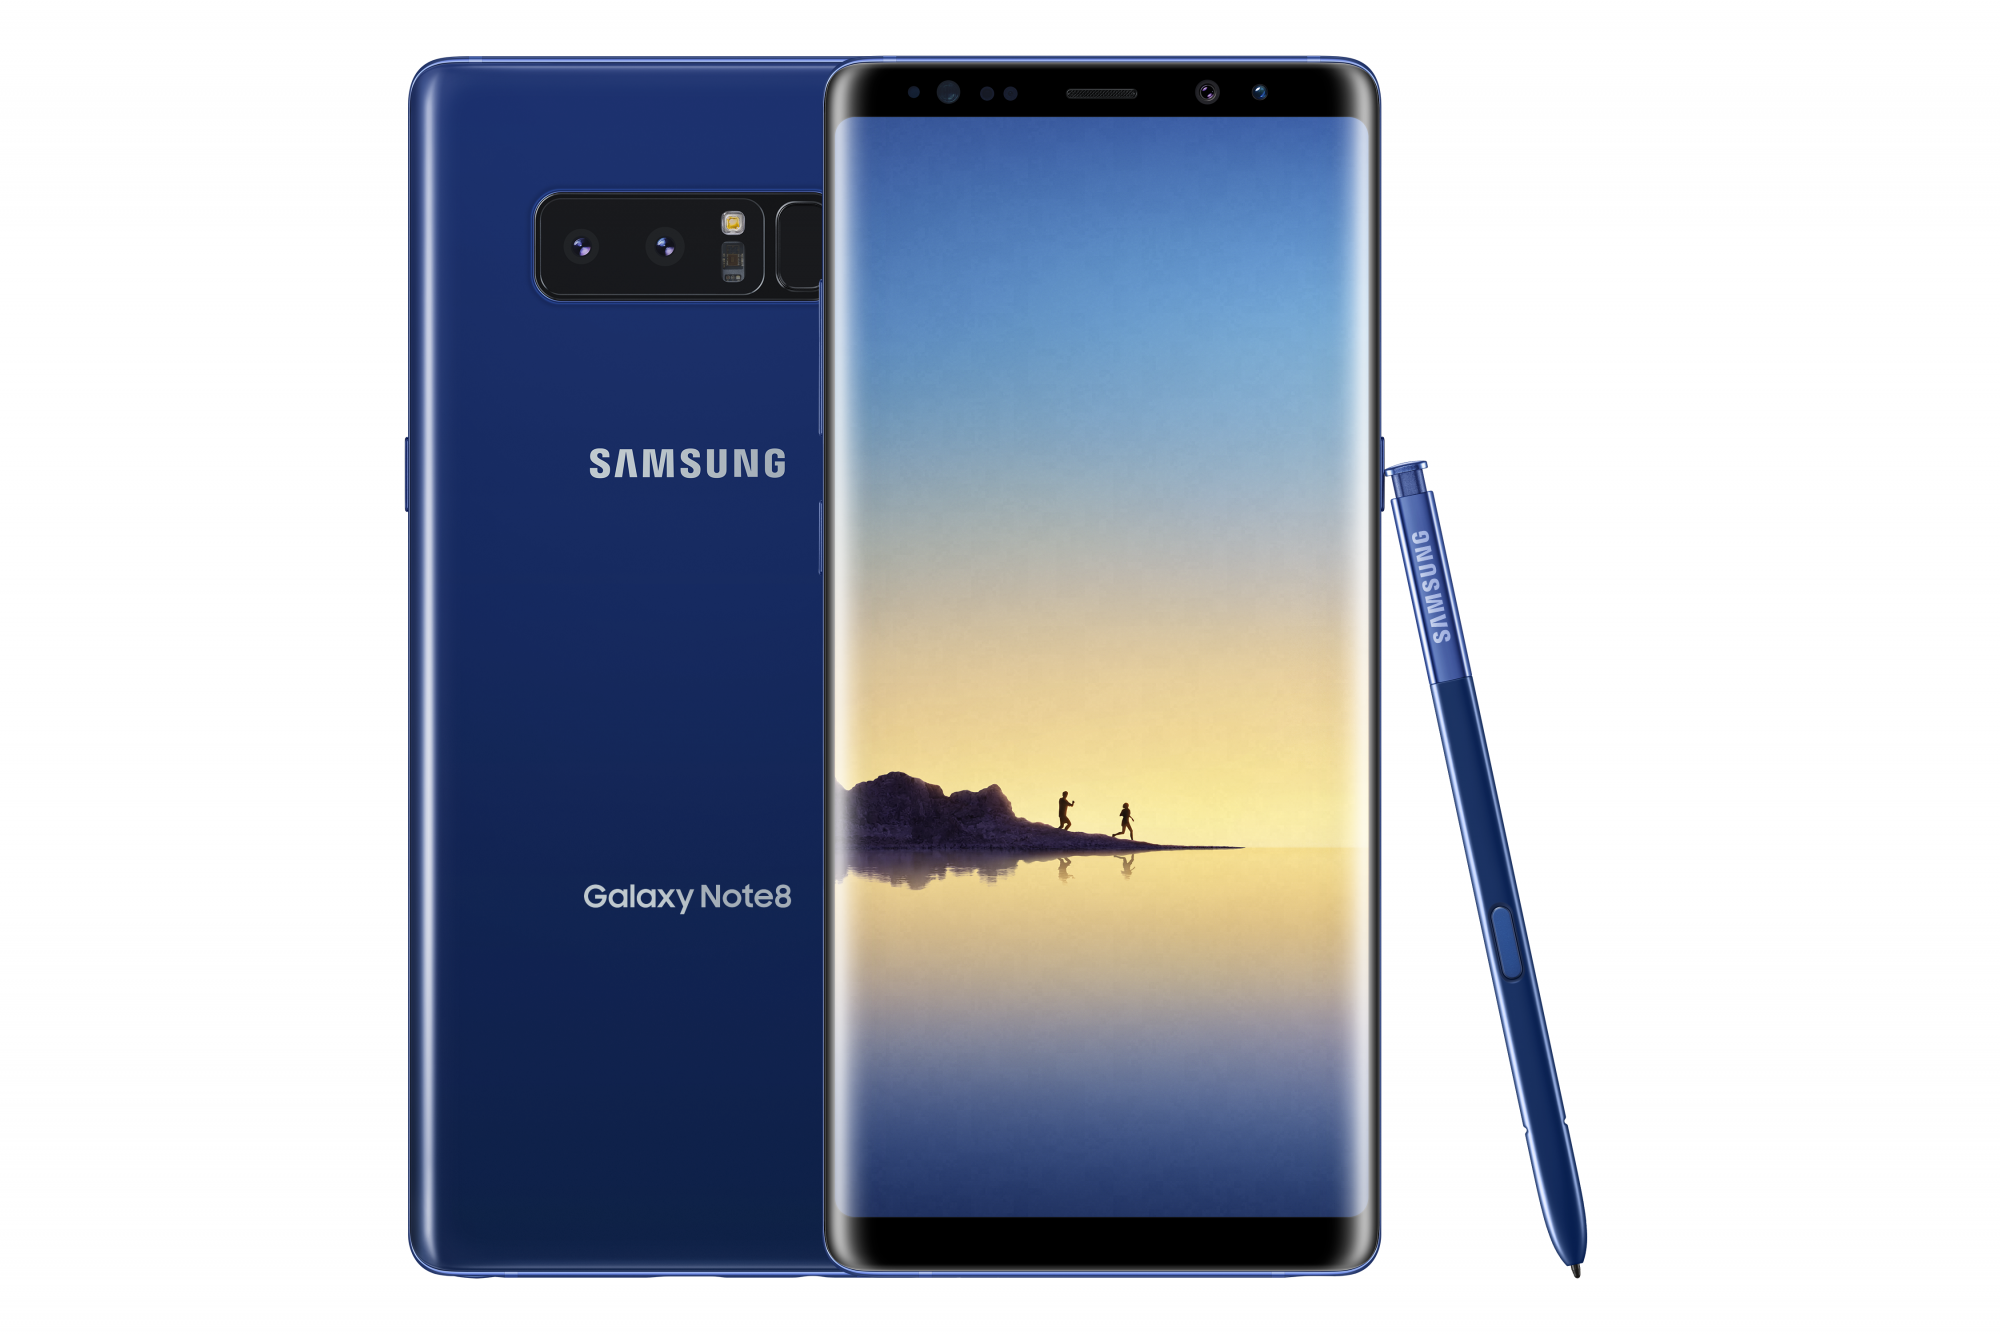 Note 9 plus. Samsung Galaxy s9 Note. Самсунг галакси нот 8. Samsung Galaxy Note 9 плюс. Samsung Galaxy Note 8 64gb.